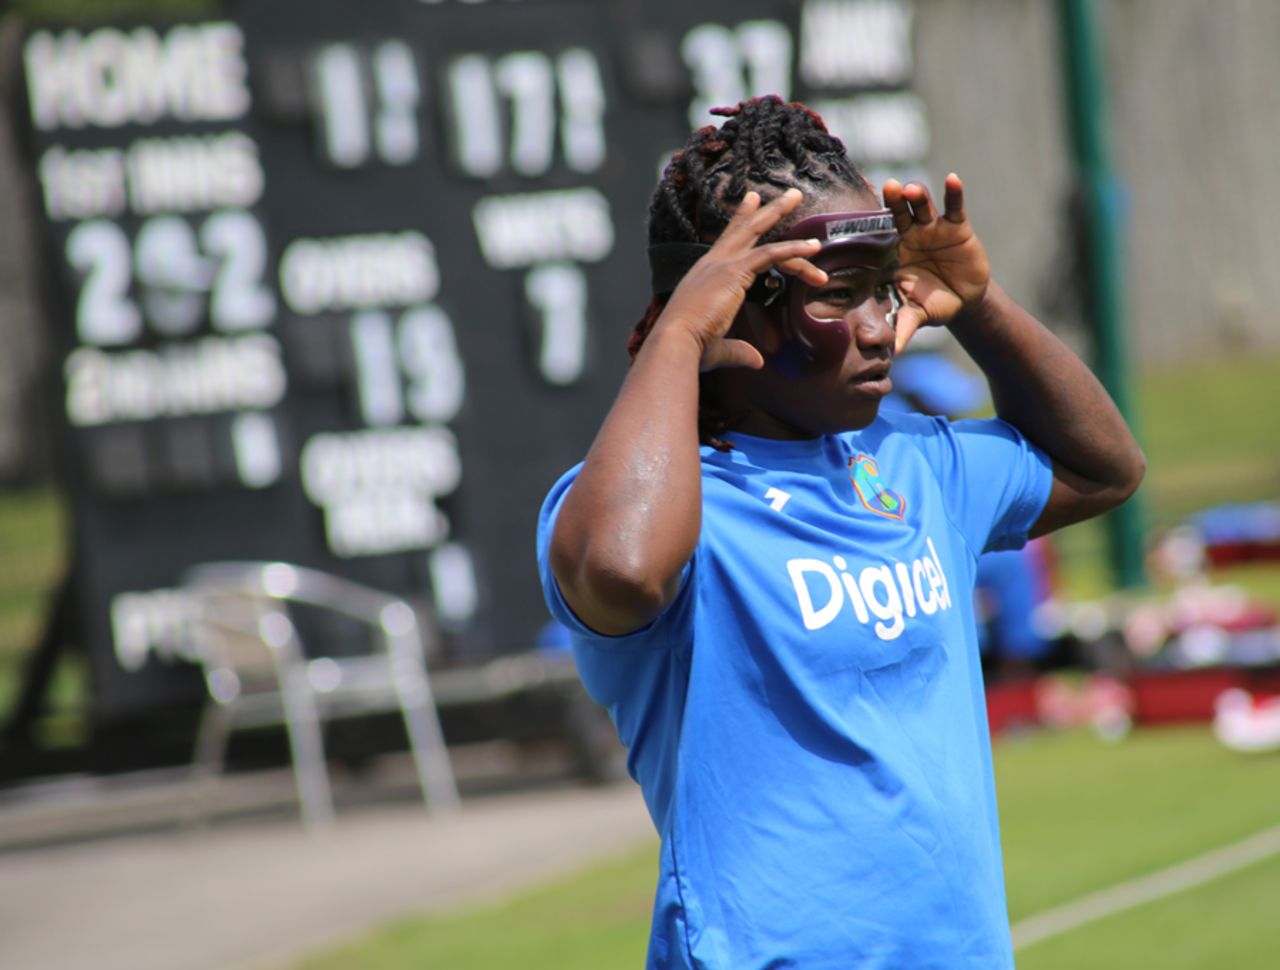 Deandra Dottin fixes her protective face mask during a training session, Women's World Cup, Hampshire, June 4, 2017